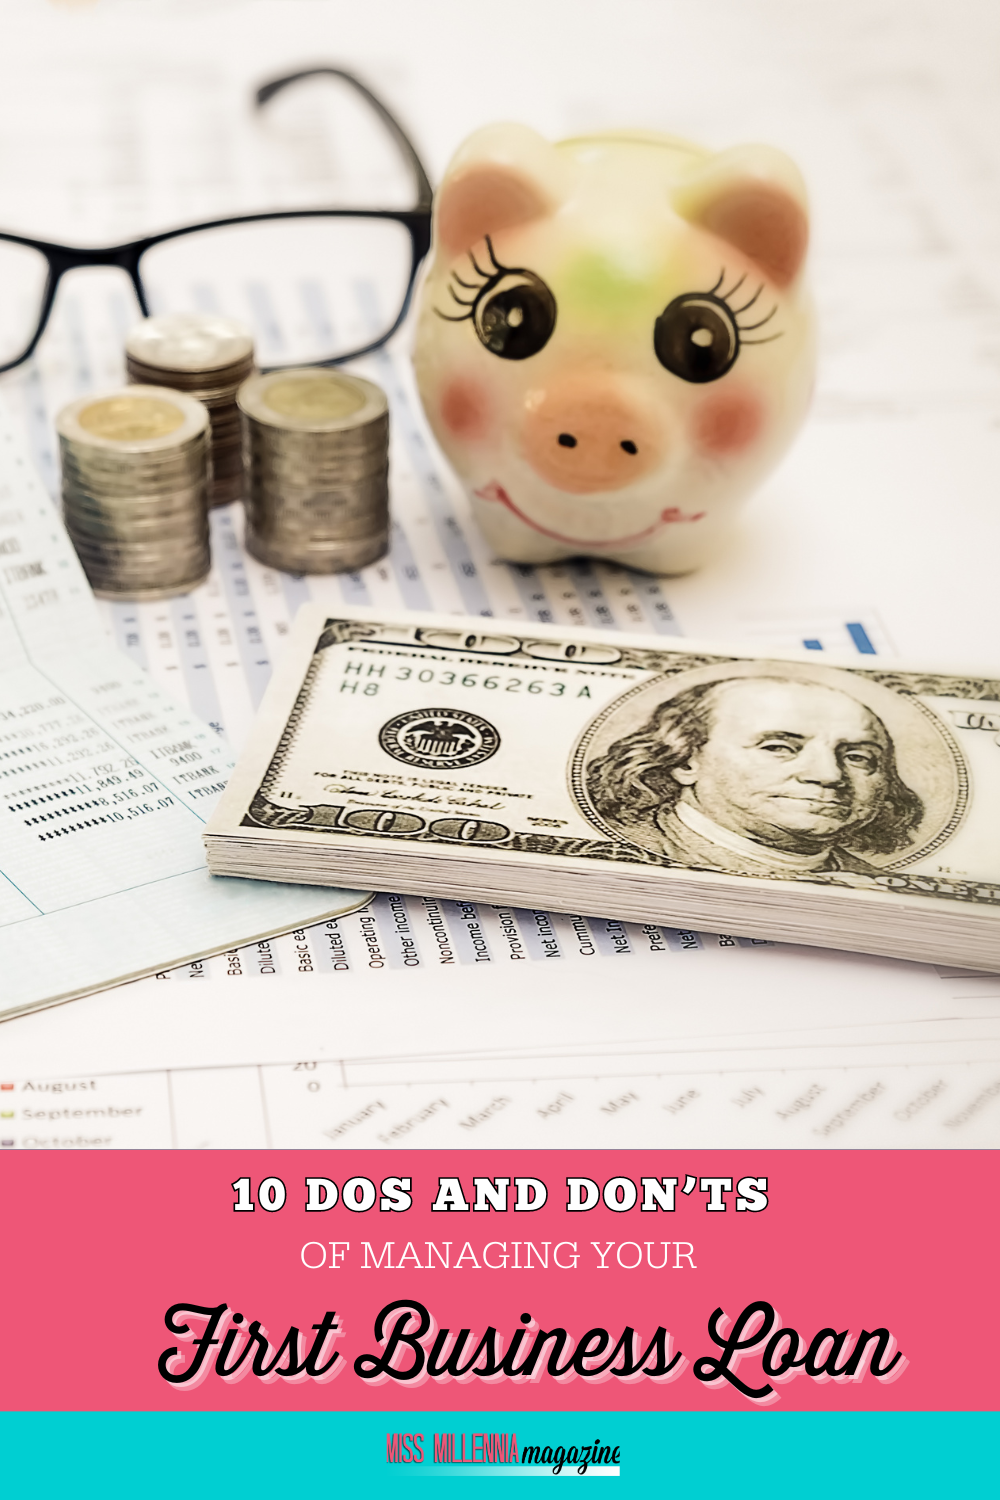 10 Dos and Don’ts of Managing Your First Business Loan